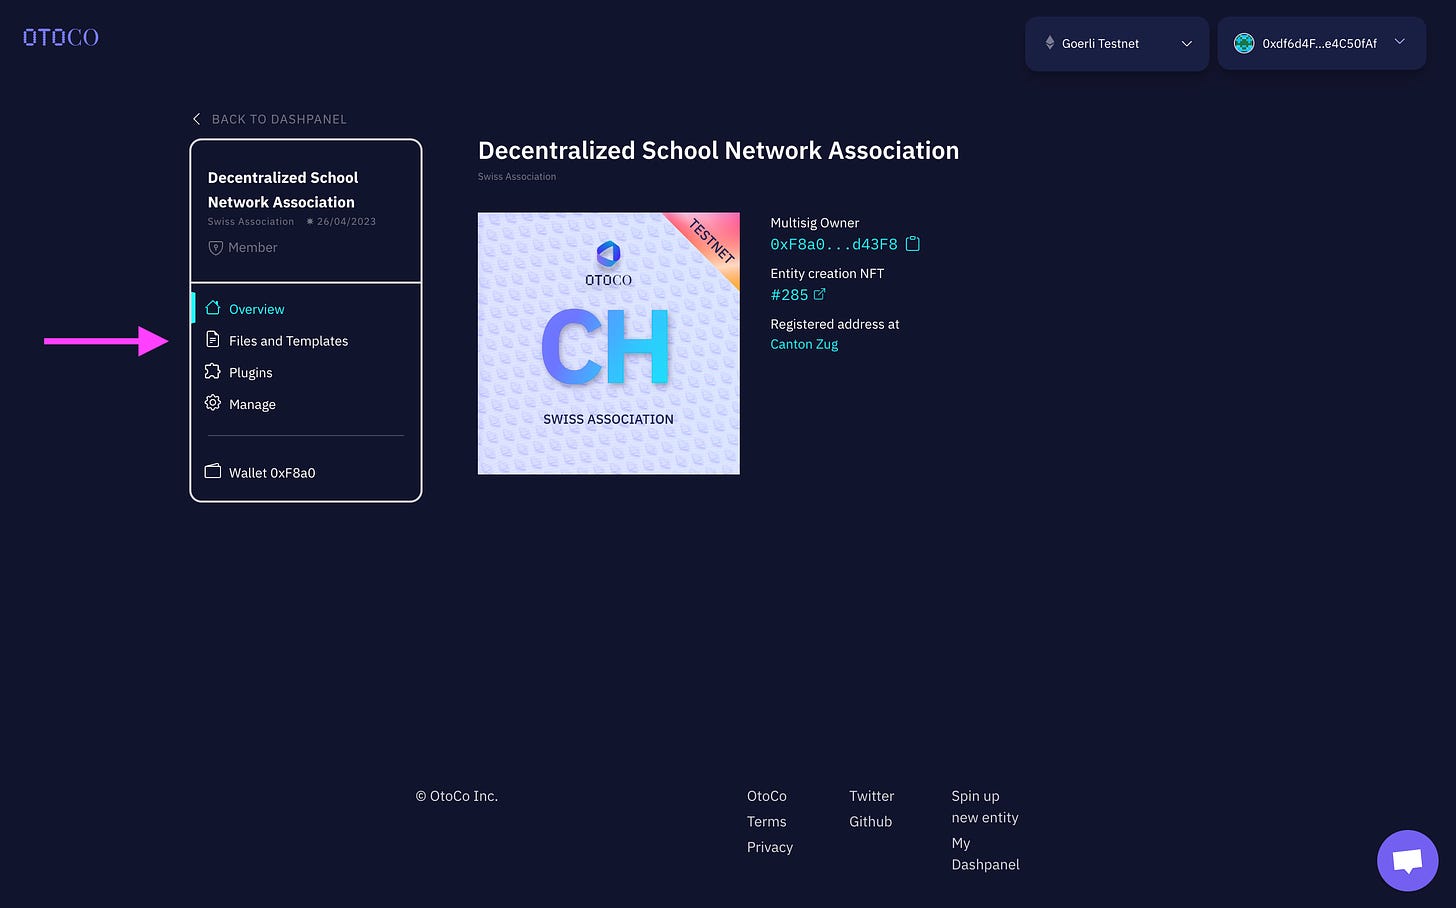 The Swiss Foundation is dead. Long live the Swiss Association - now onchain on OtoCo!